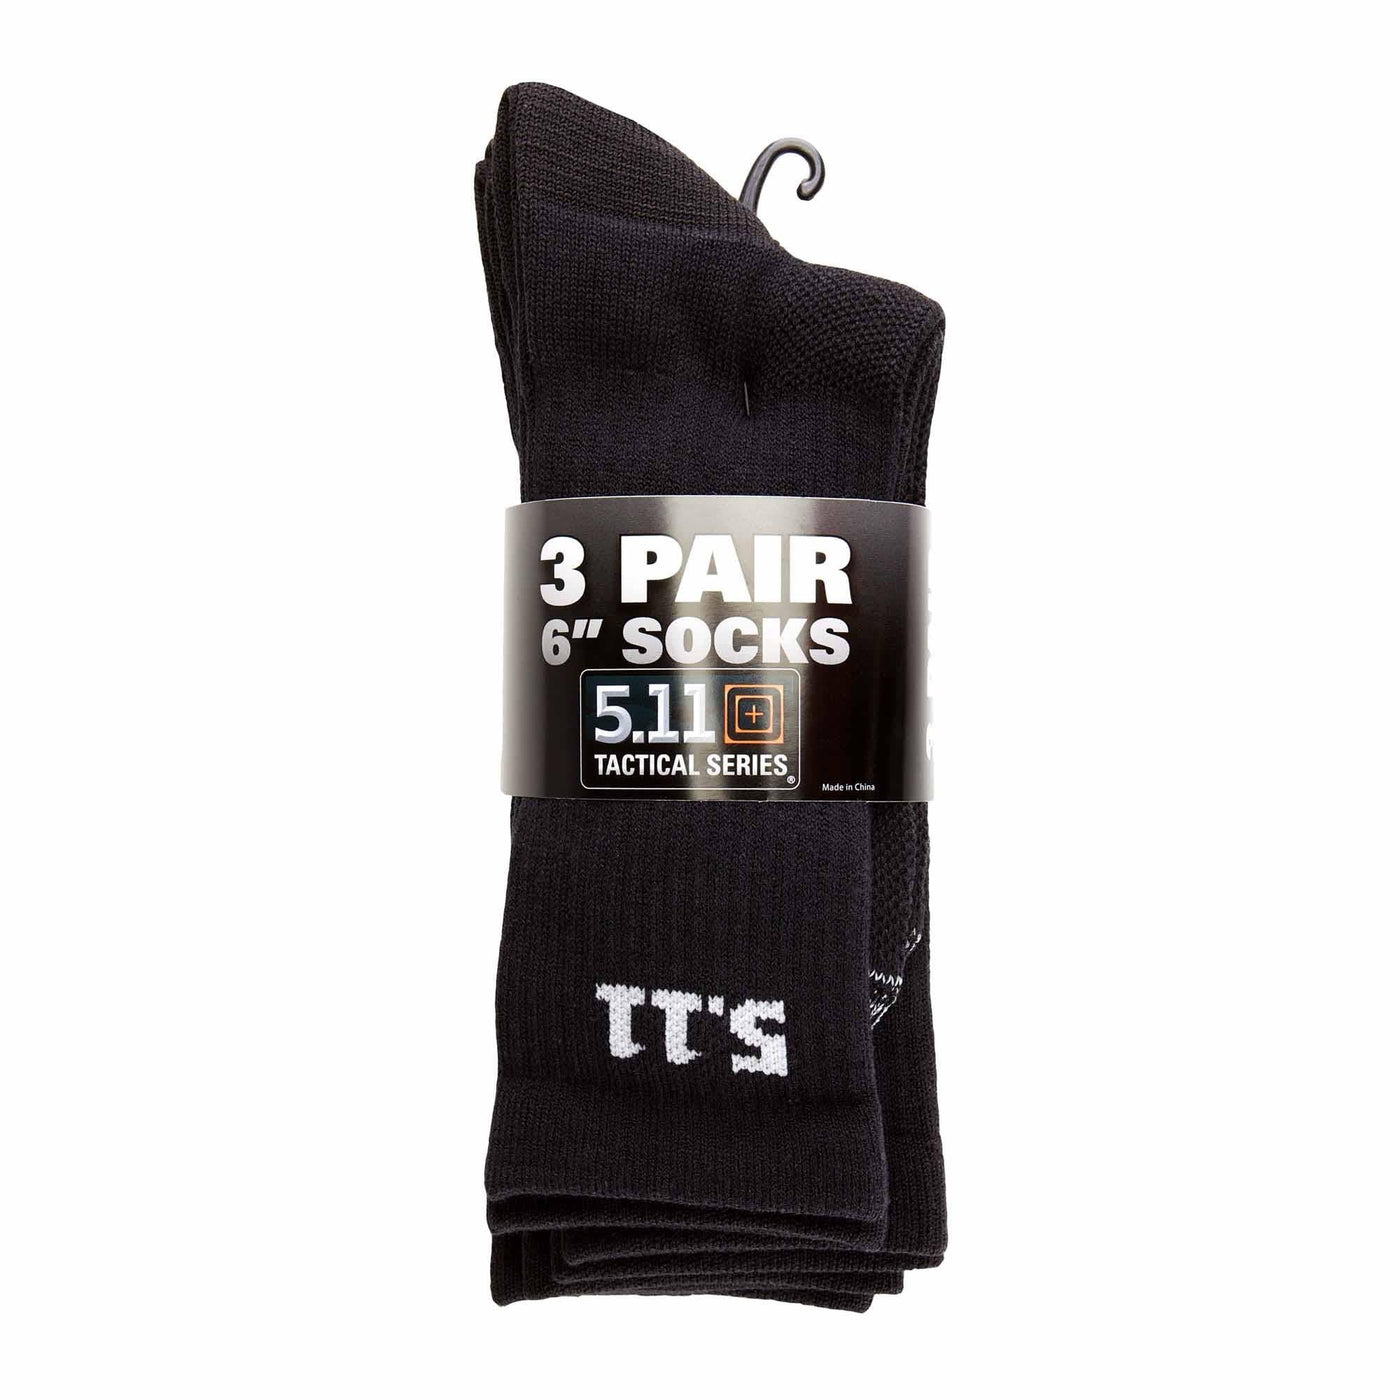 6" Socks - 3 Pairs One Size Fits Most